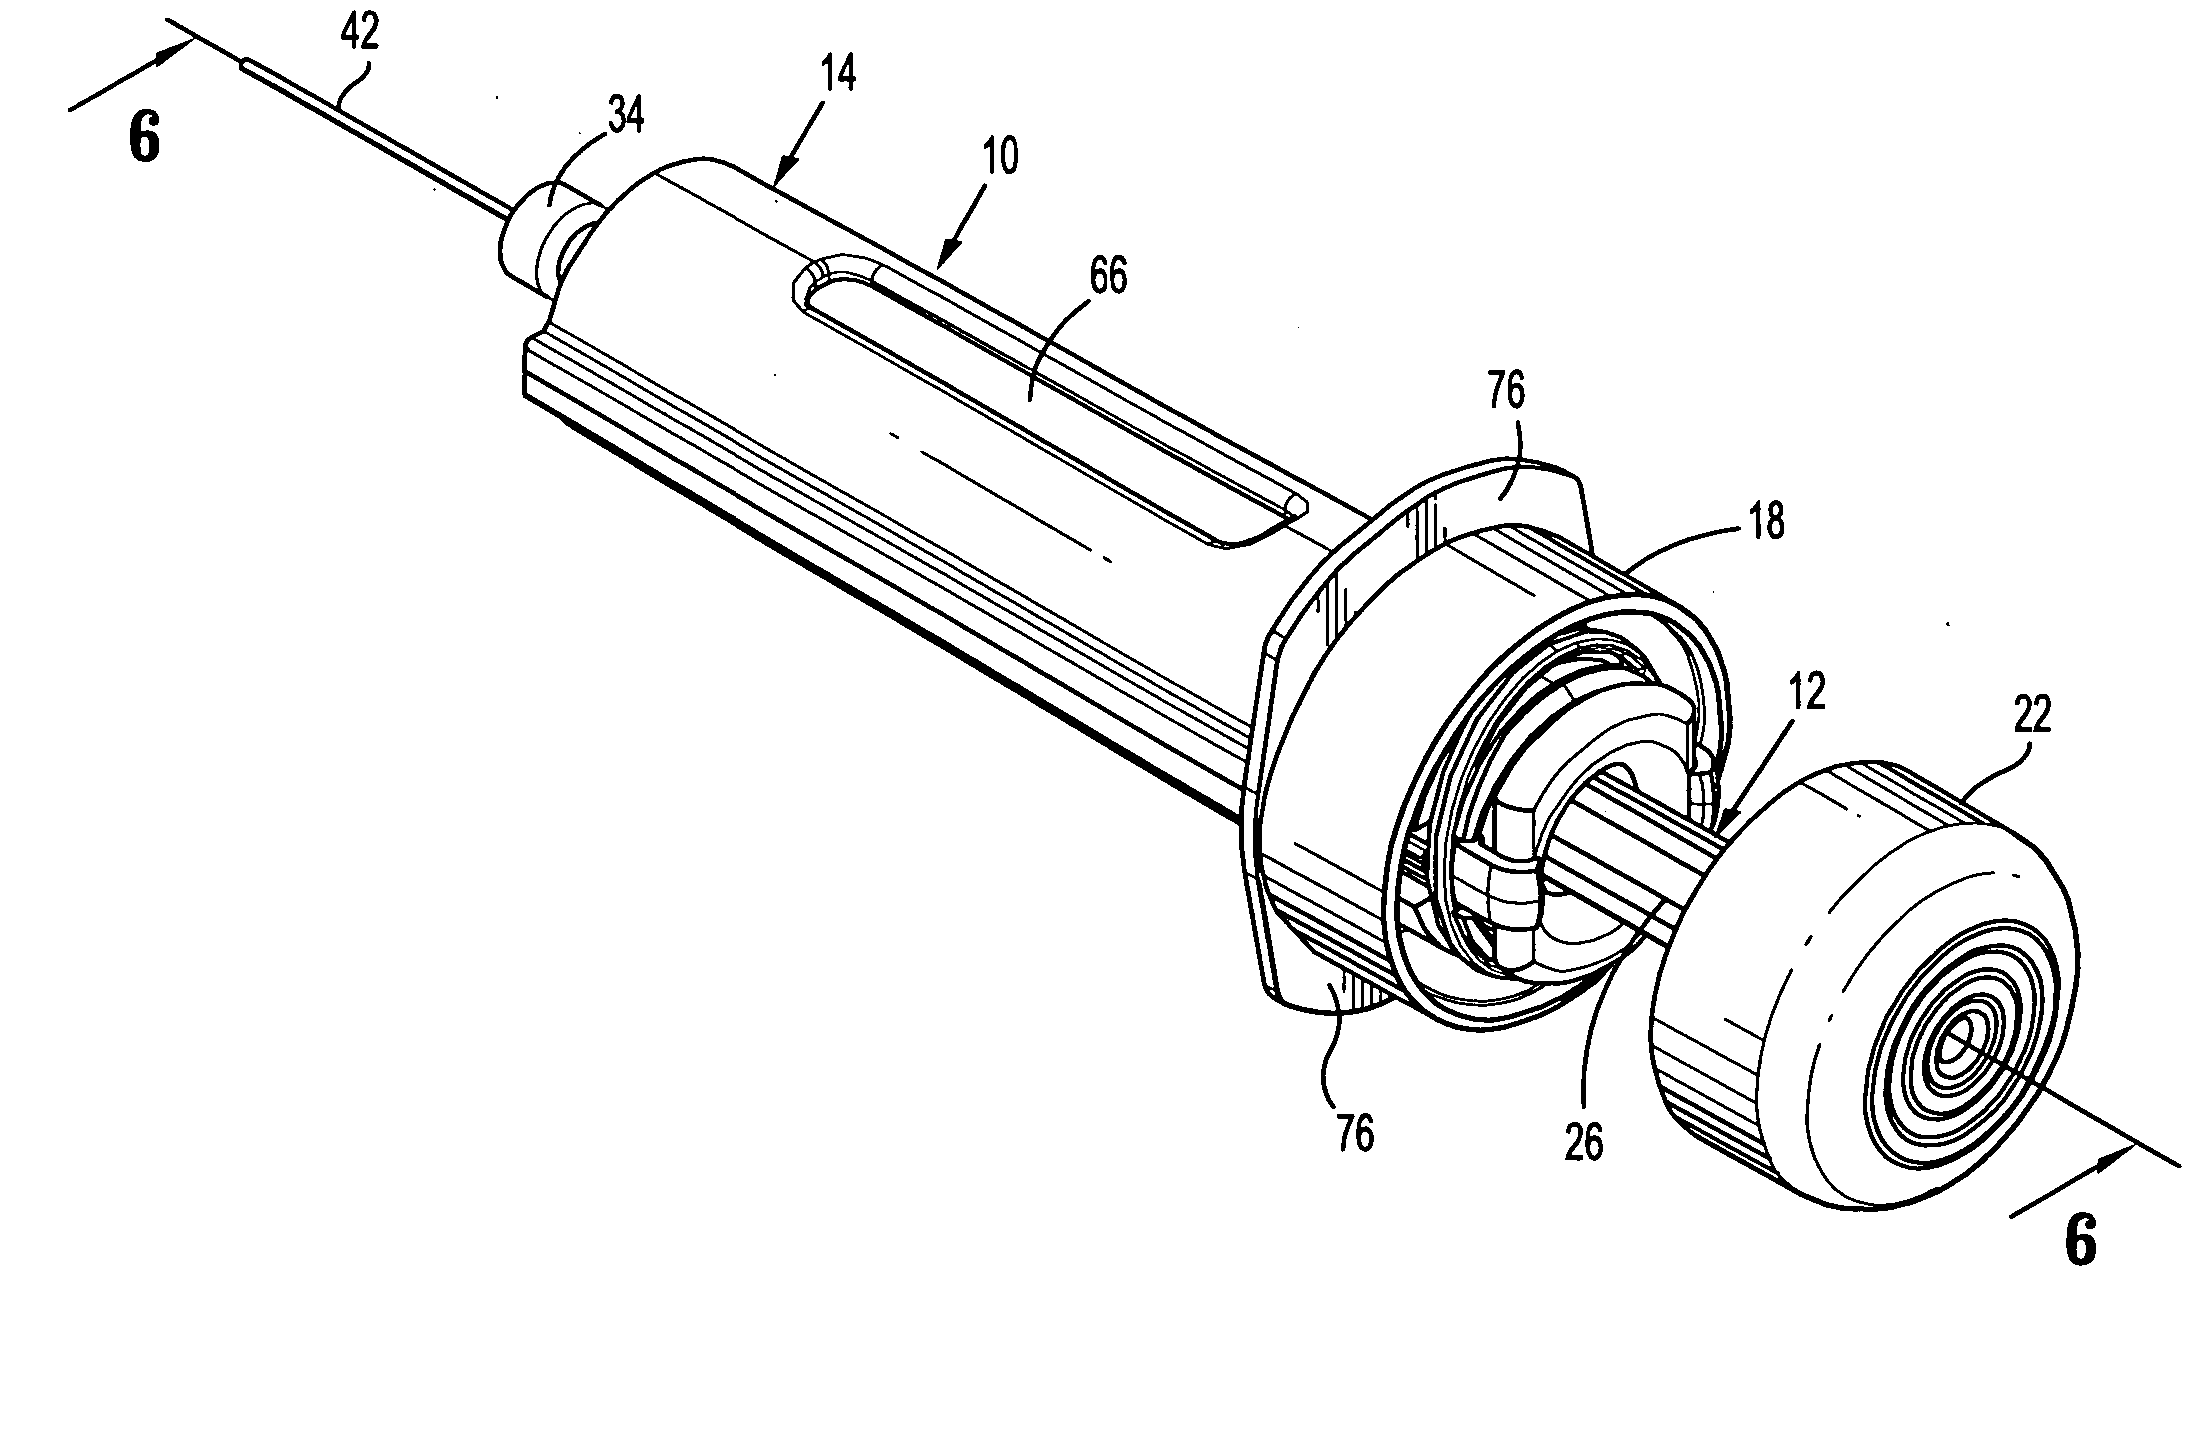 Passive latch ring safety shield for injection devices